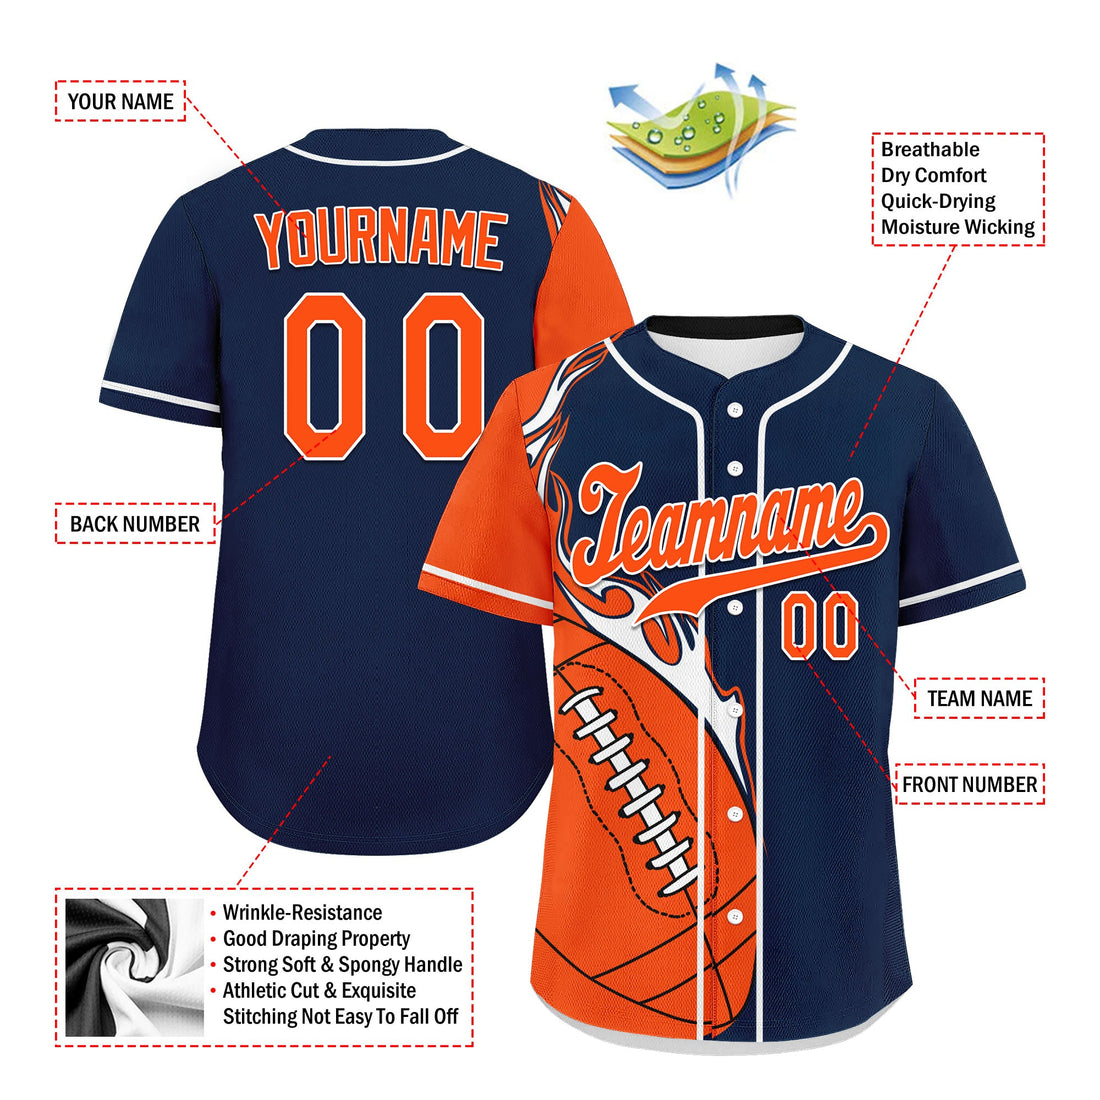 Custom Blue Orange Classic Style Personalized Authentic Baseball Jersey UN002-D0b0a00-a0